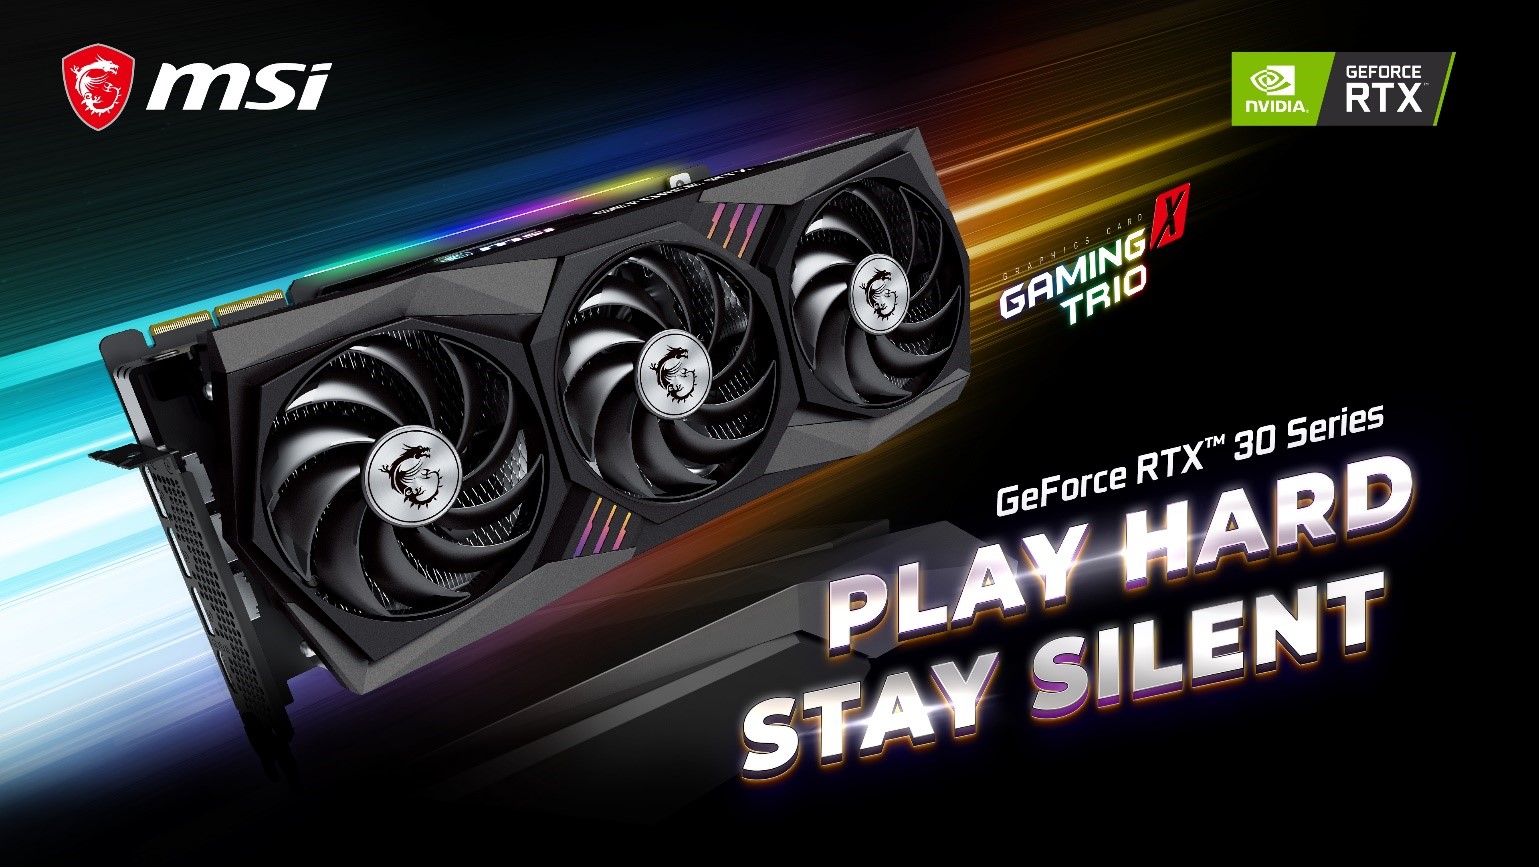 Msi Announces Geforce Rtx 3090 Rtx 3080 And Rtx 3070 Graphics Cards Videocardz Com